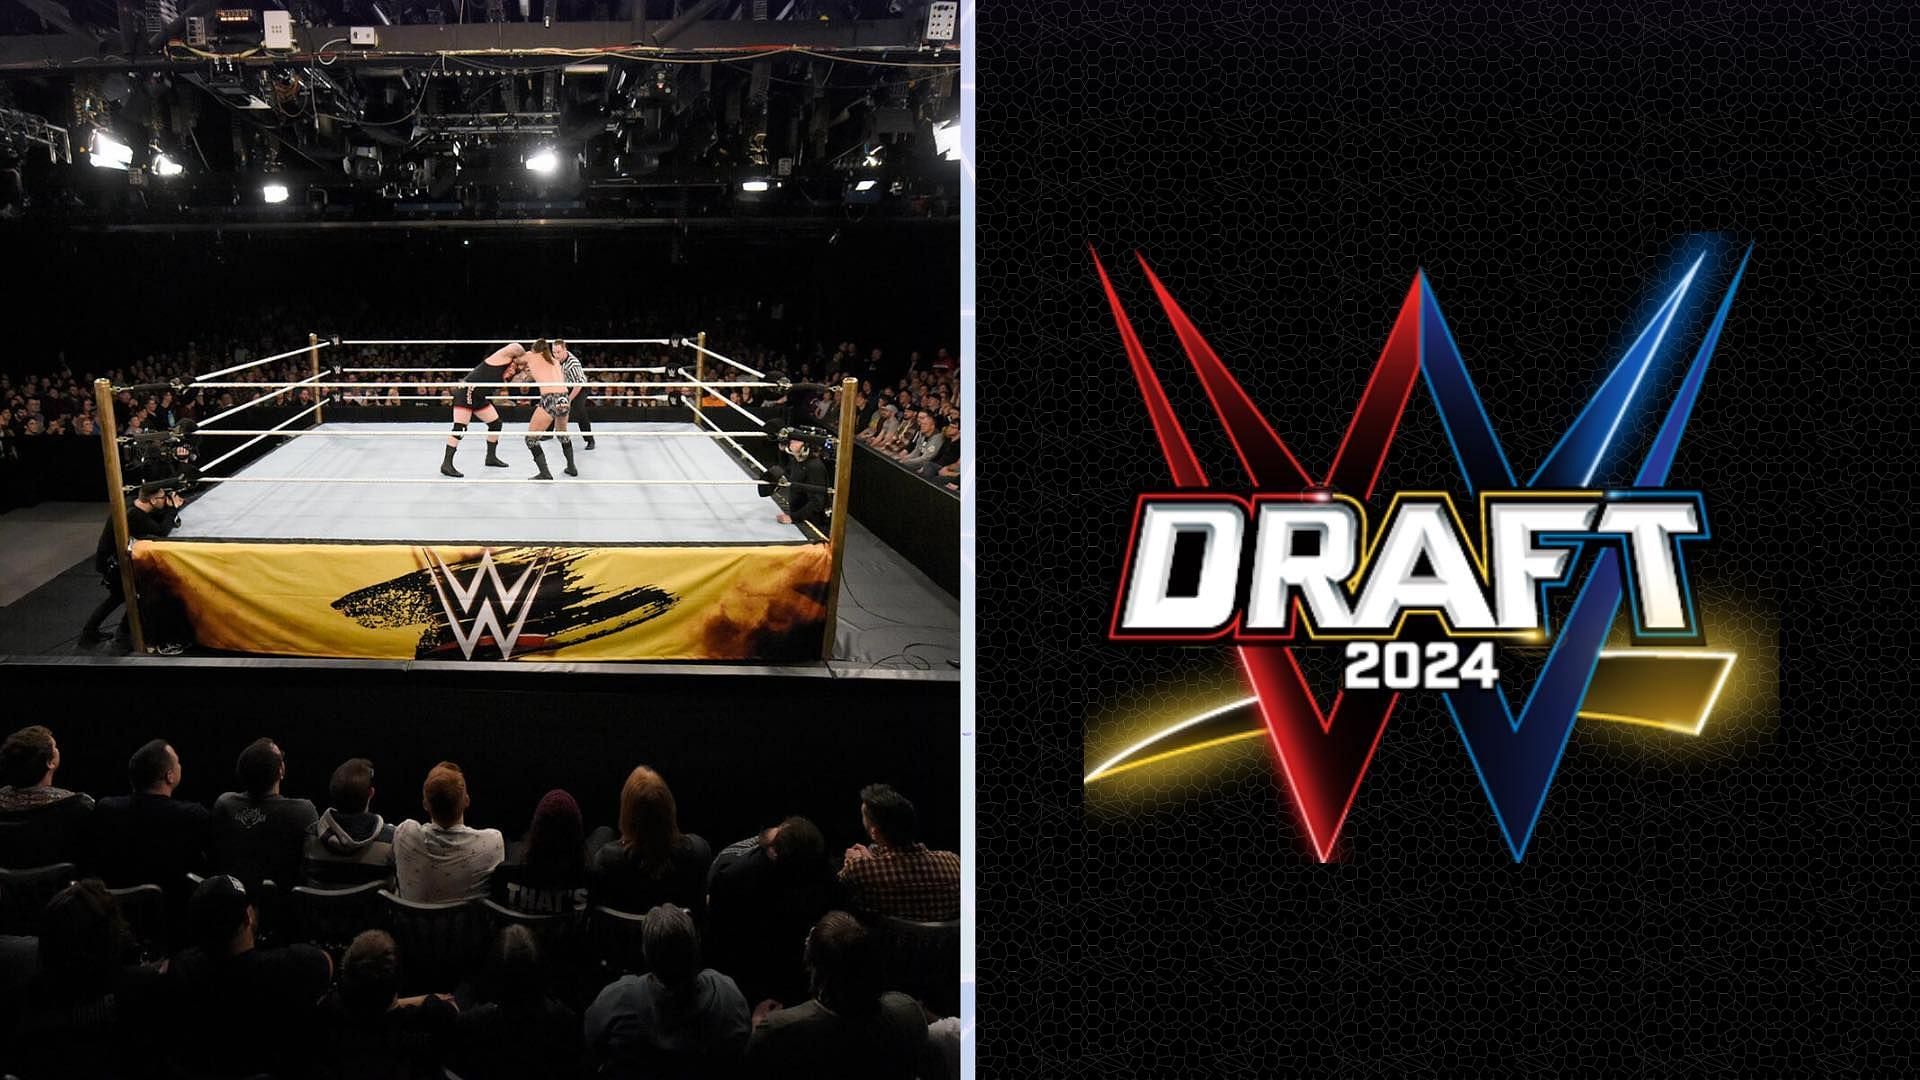 WWE Draft this year will take place on April 26 and 29.